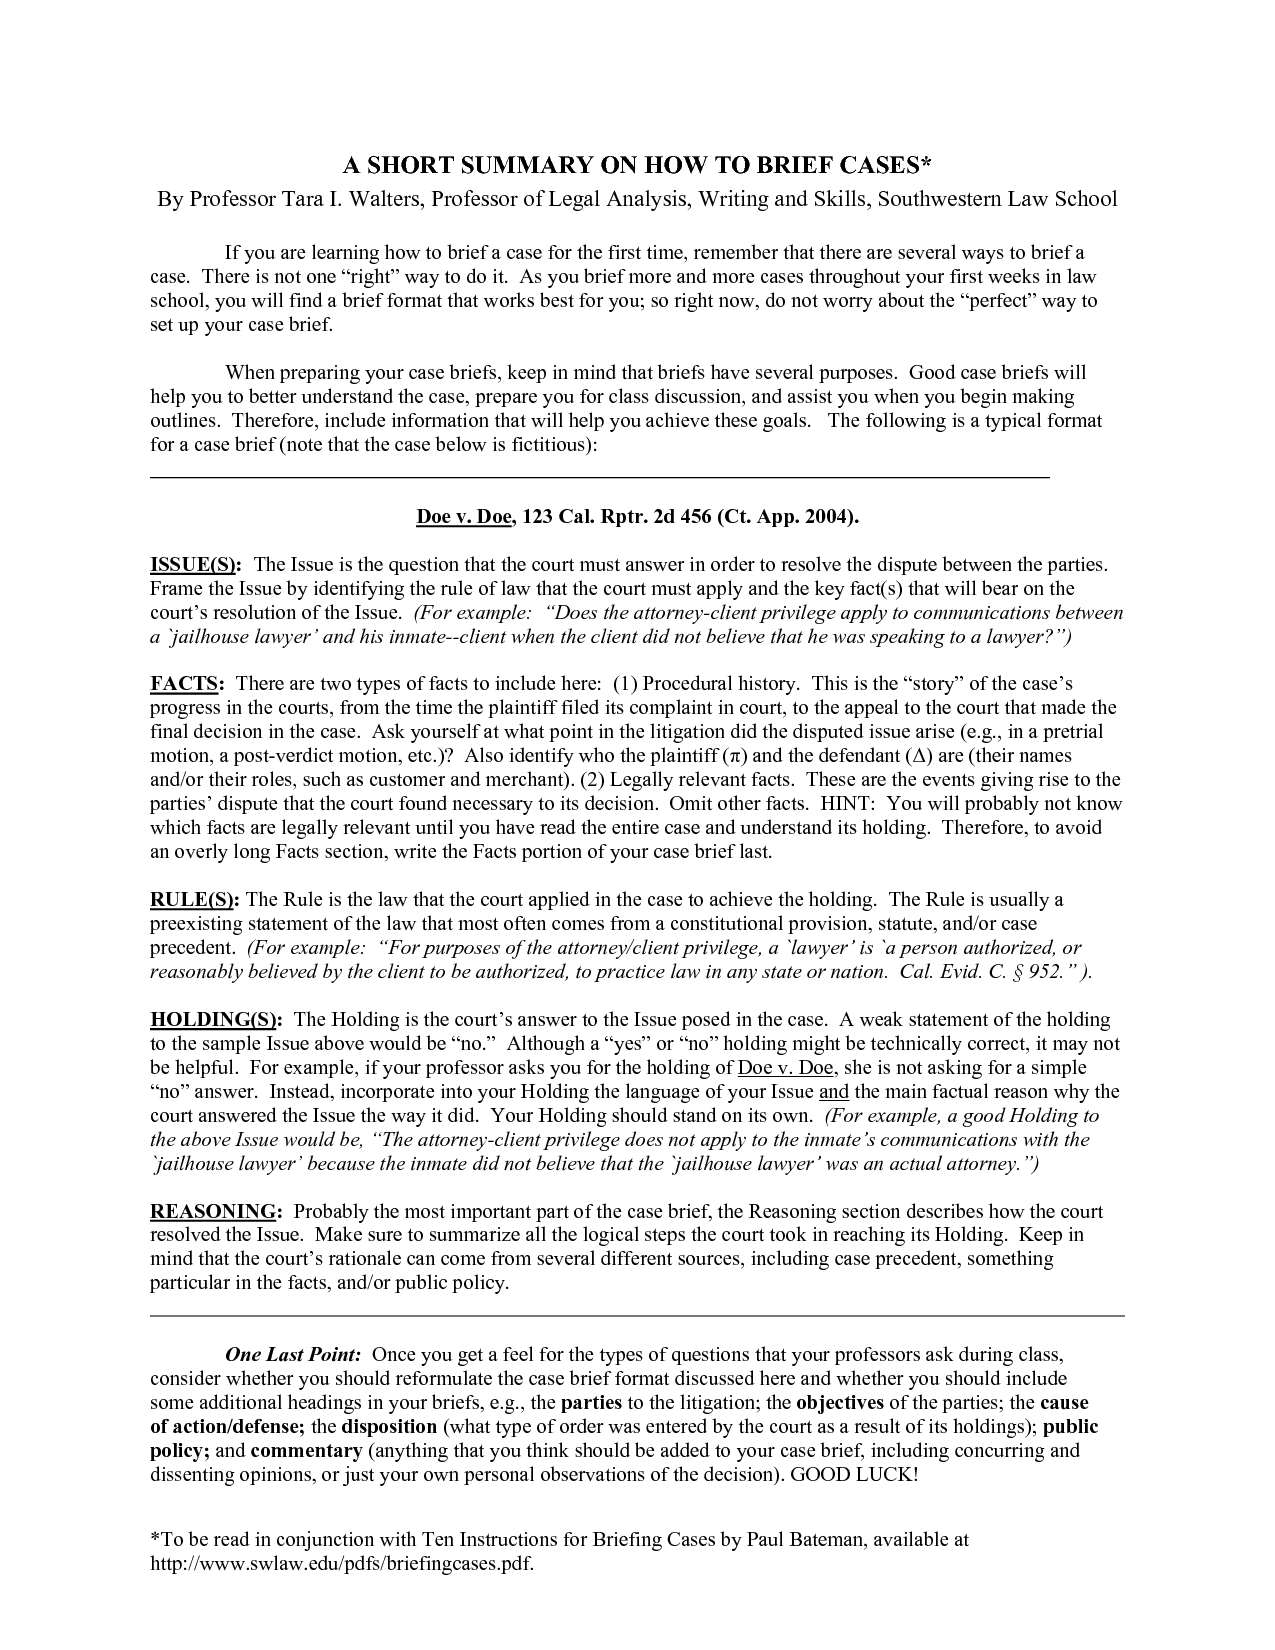 Case Brief Template | Cyberuse within Legal Brief Template | Best 